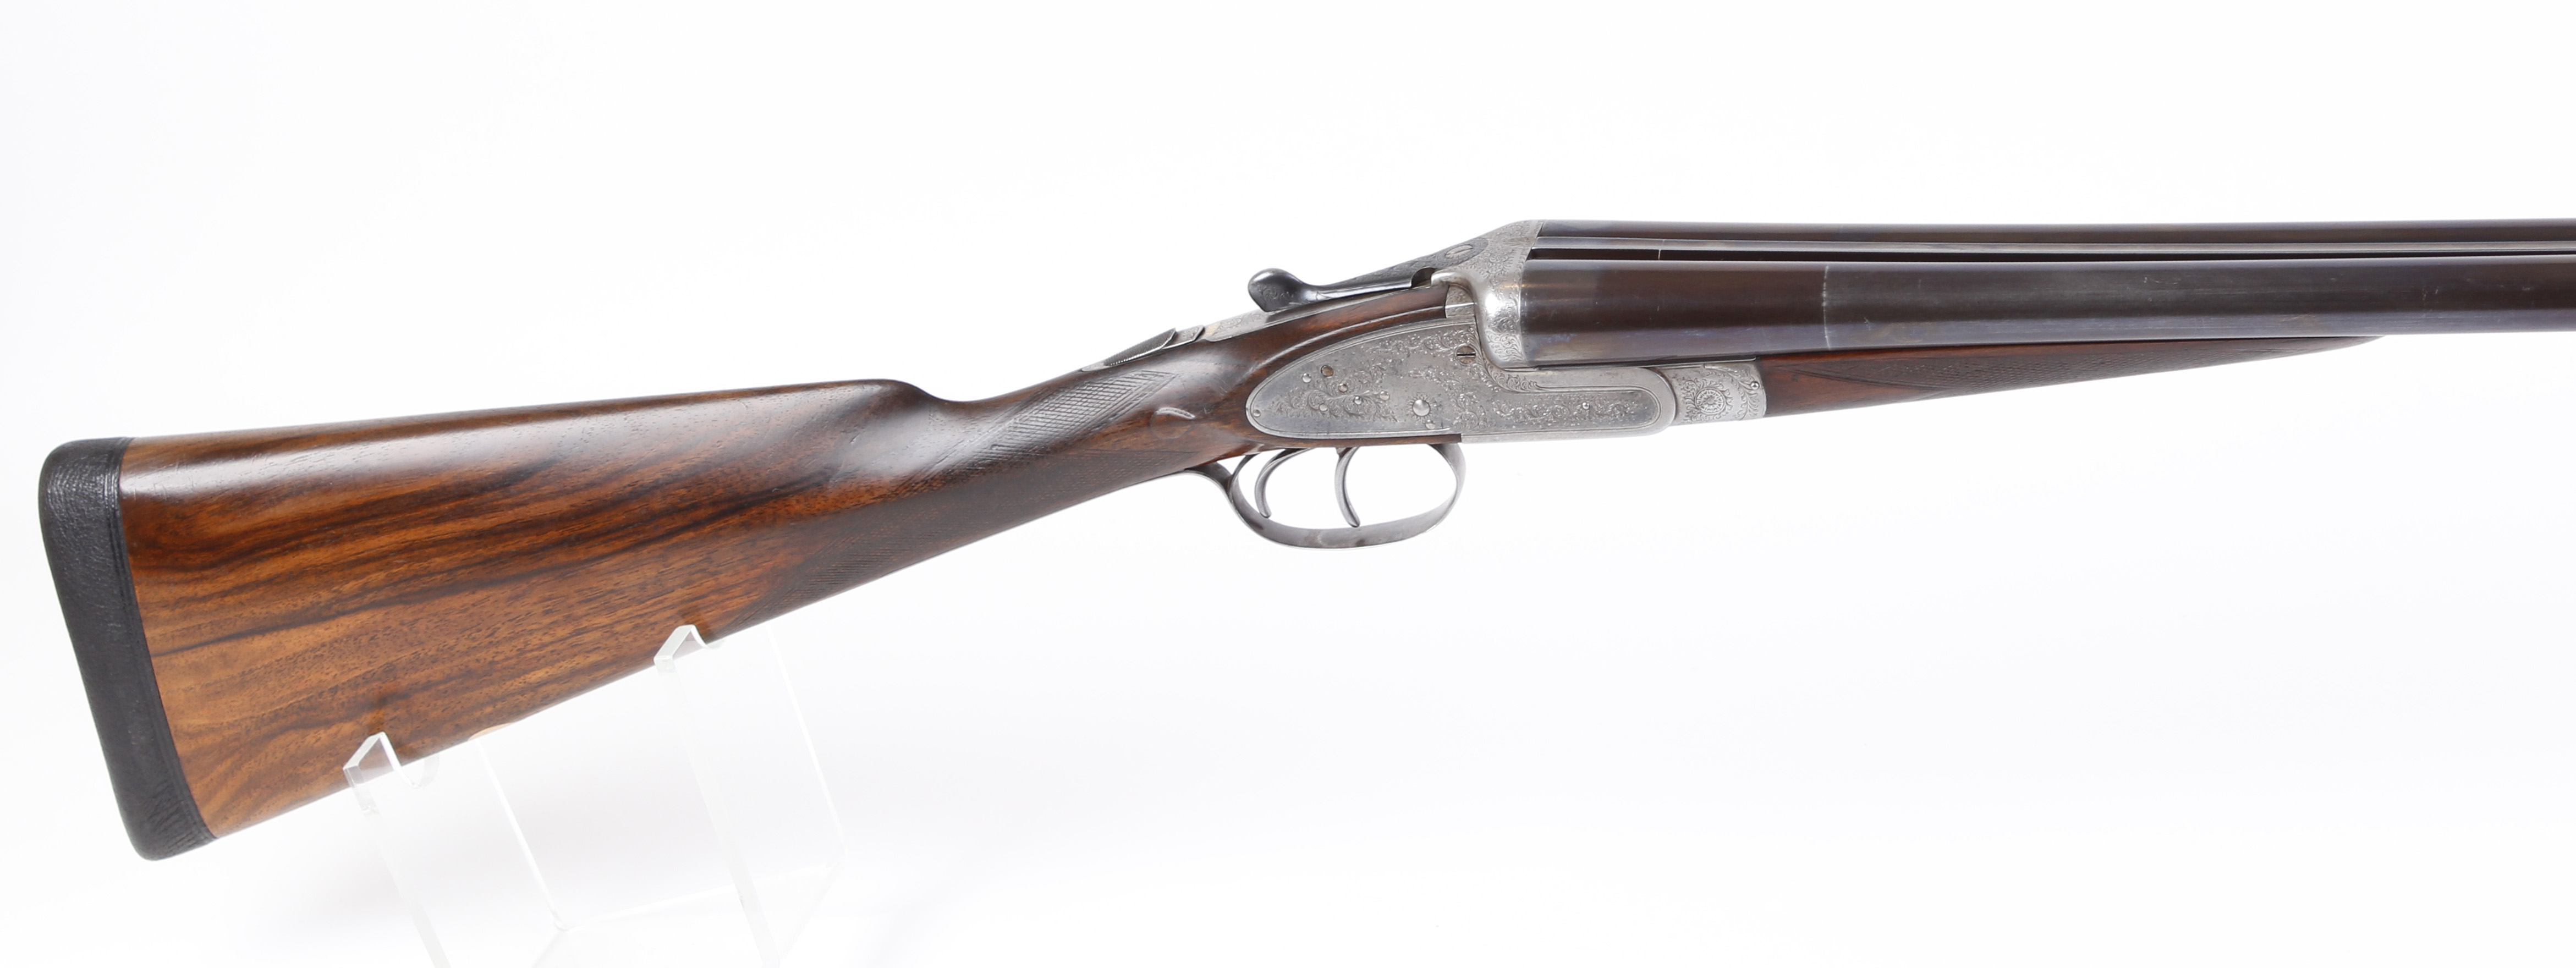 (S2) 12 bore sidelock ejector by Henry Akrill, 28 ins sleeved barrels, ¼ & ¾, concave rib with - Image 7 of 12